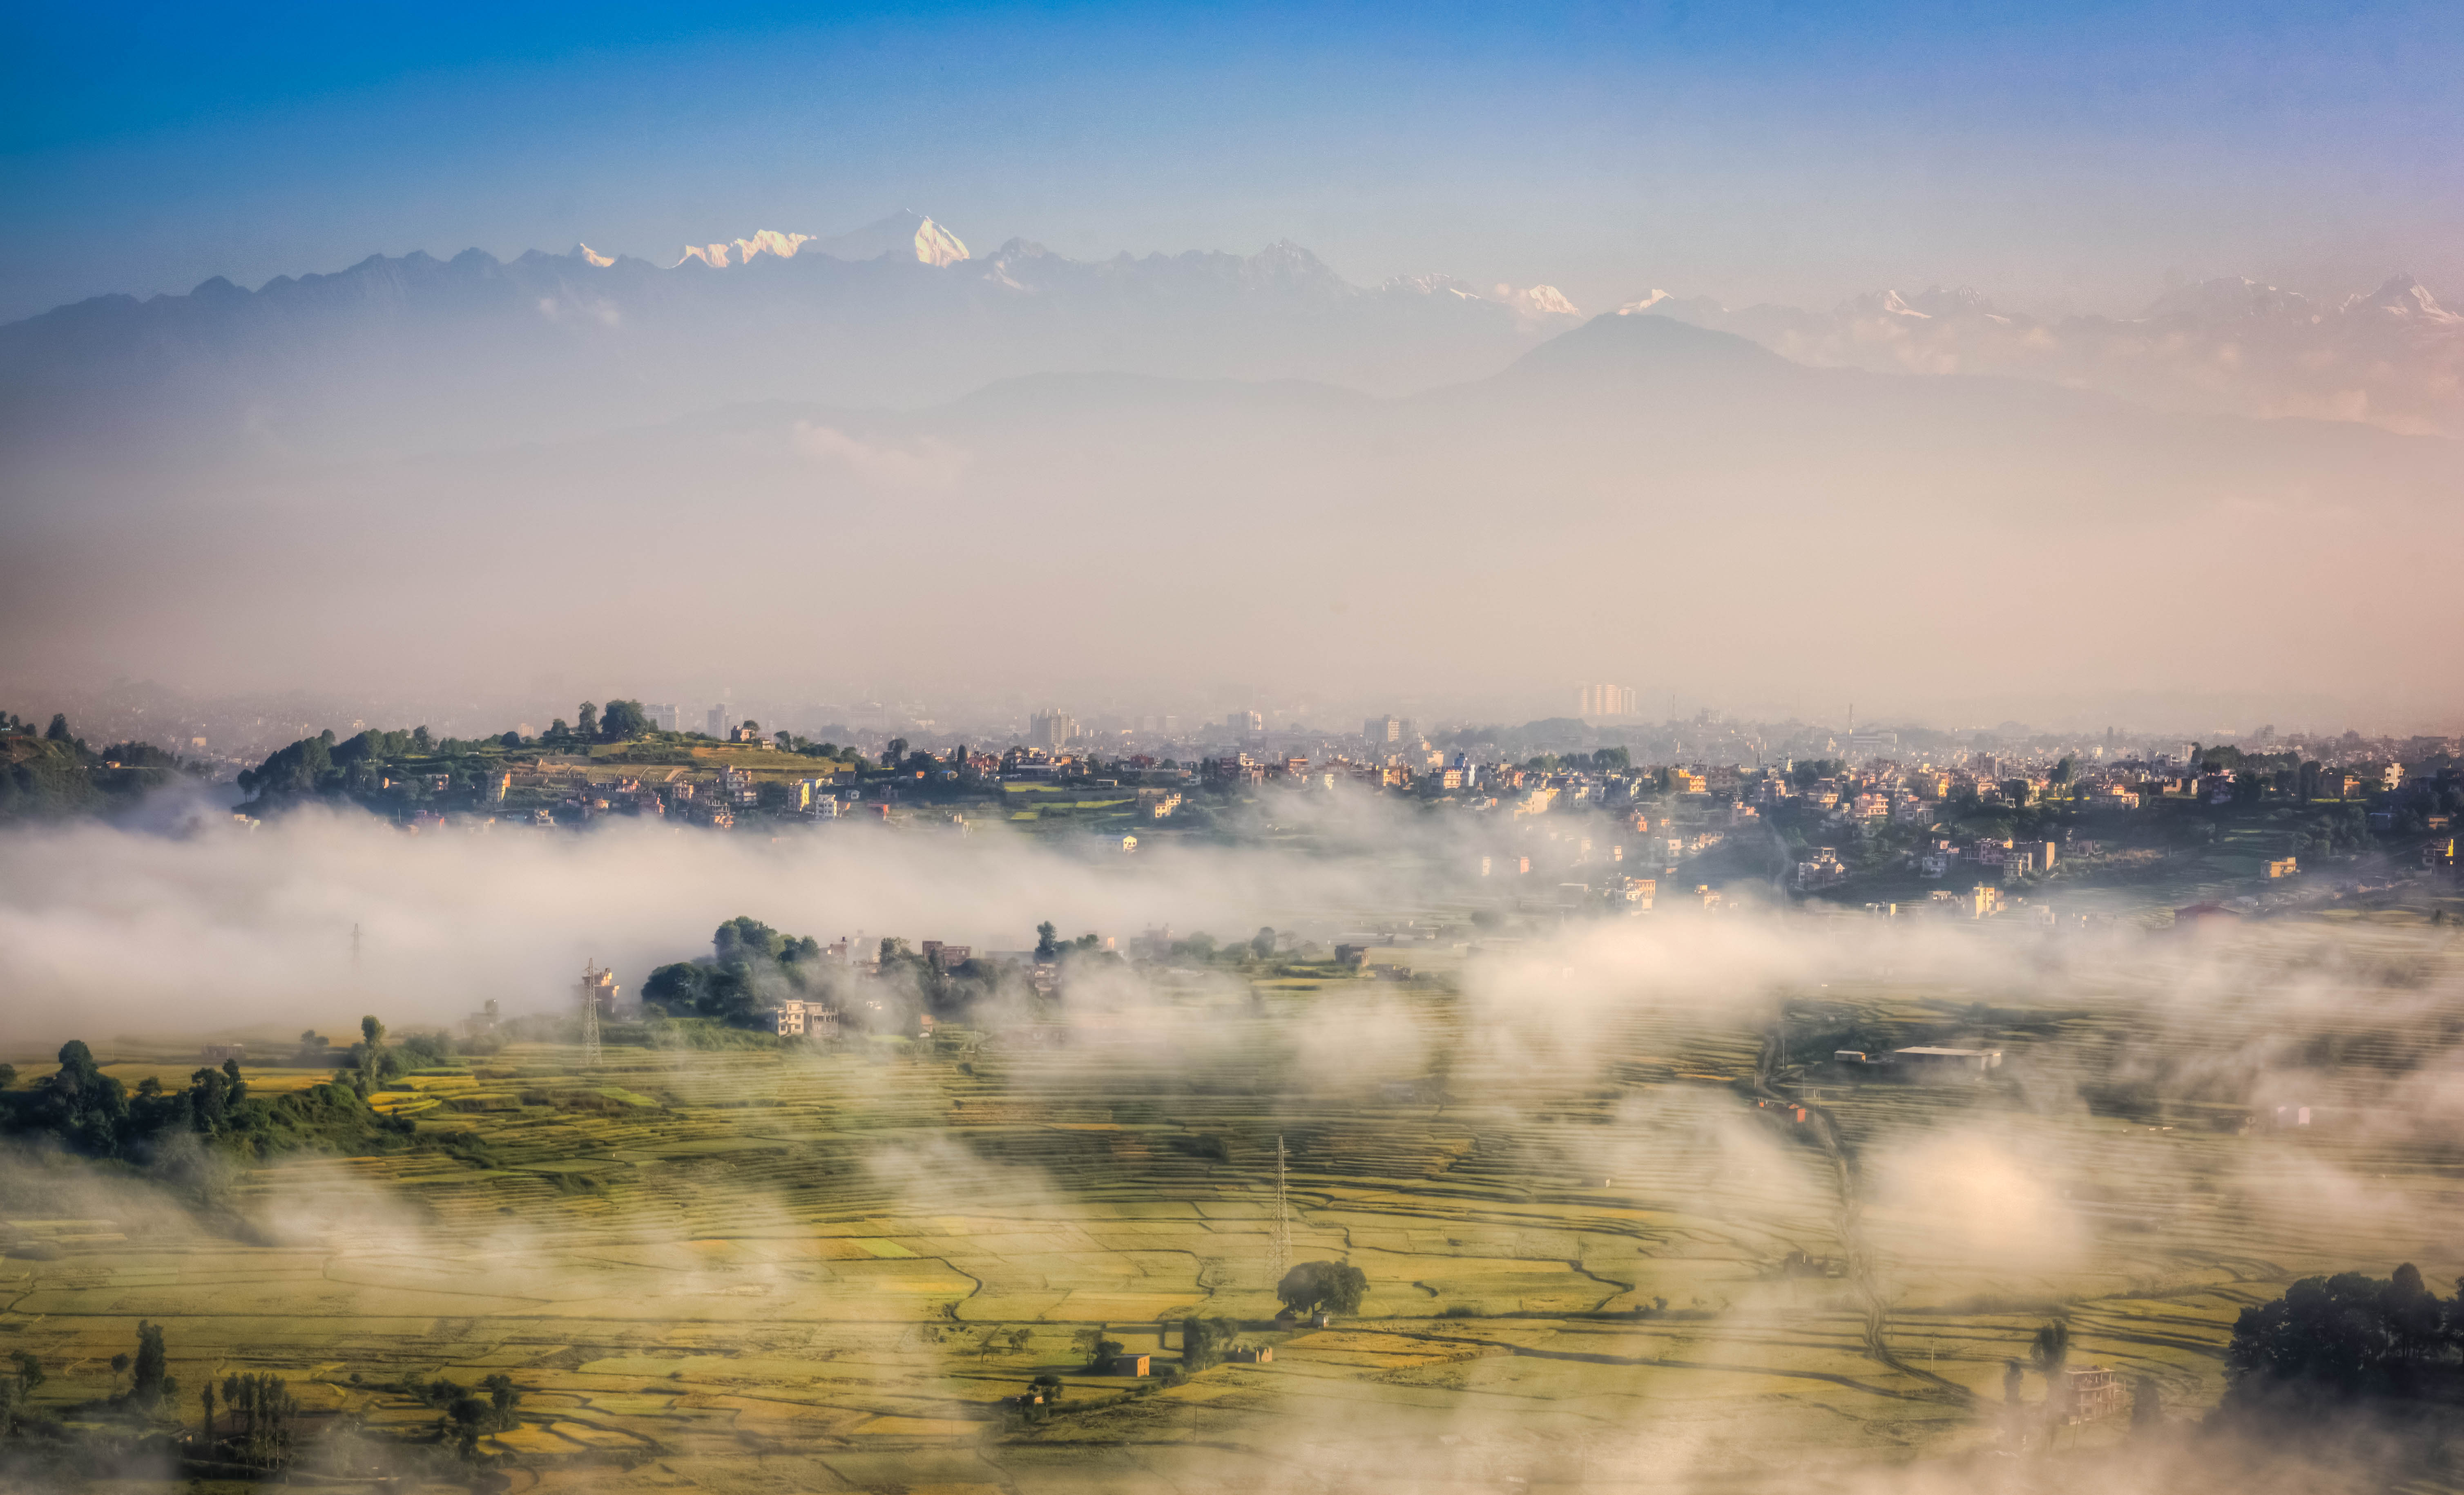 An aerial view of Kathmandu valley covered in fog.